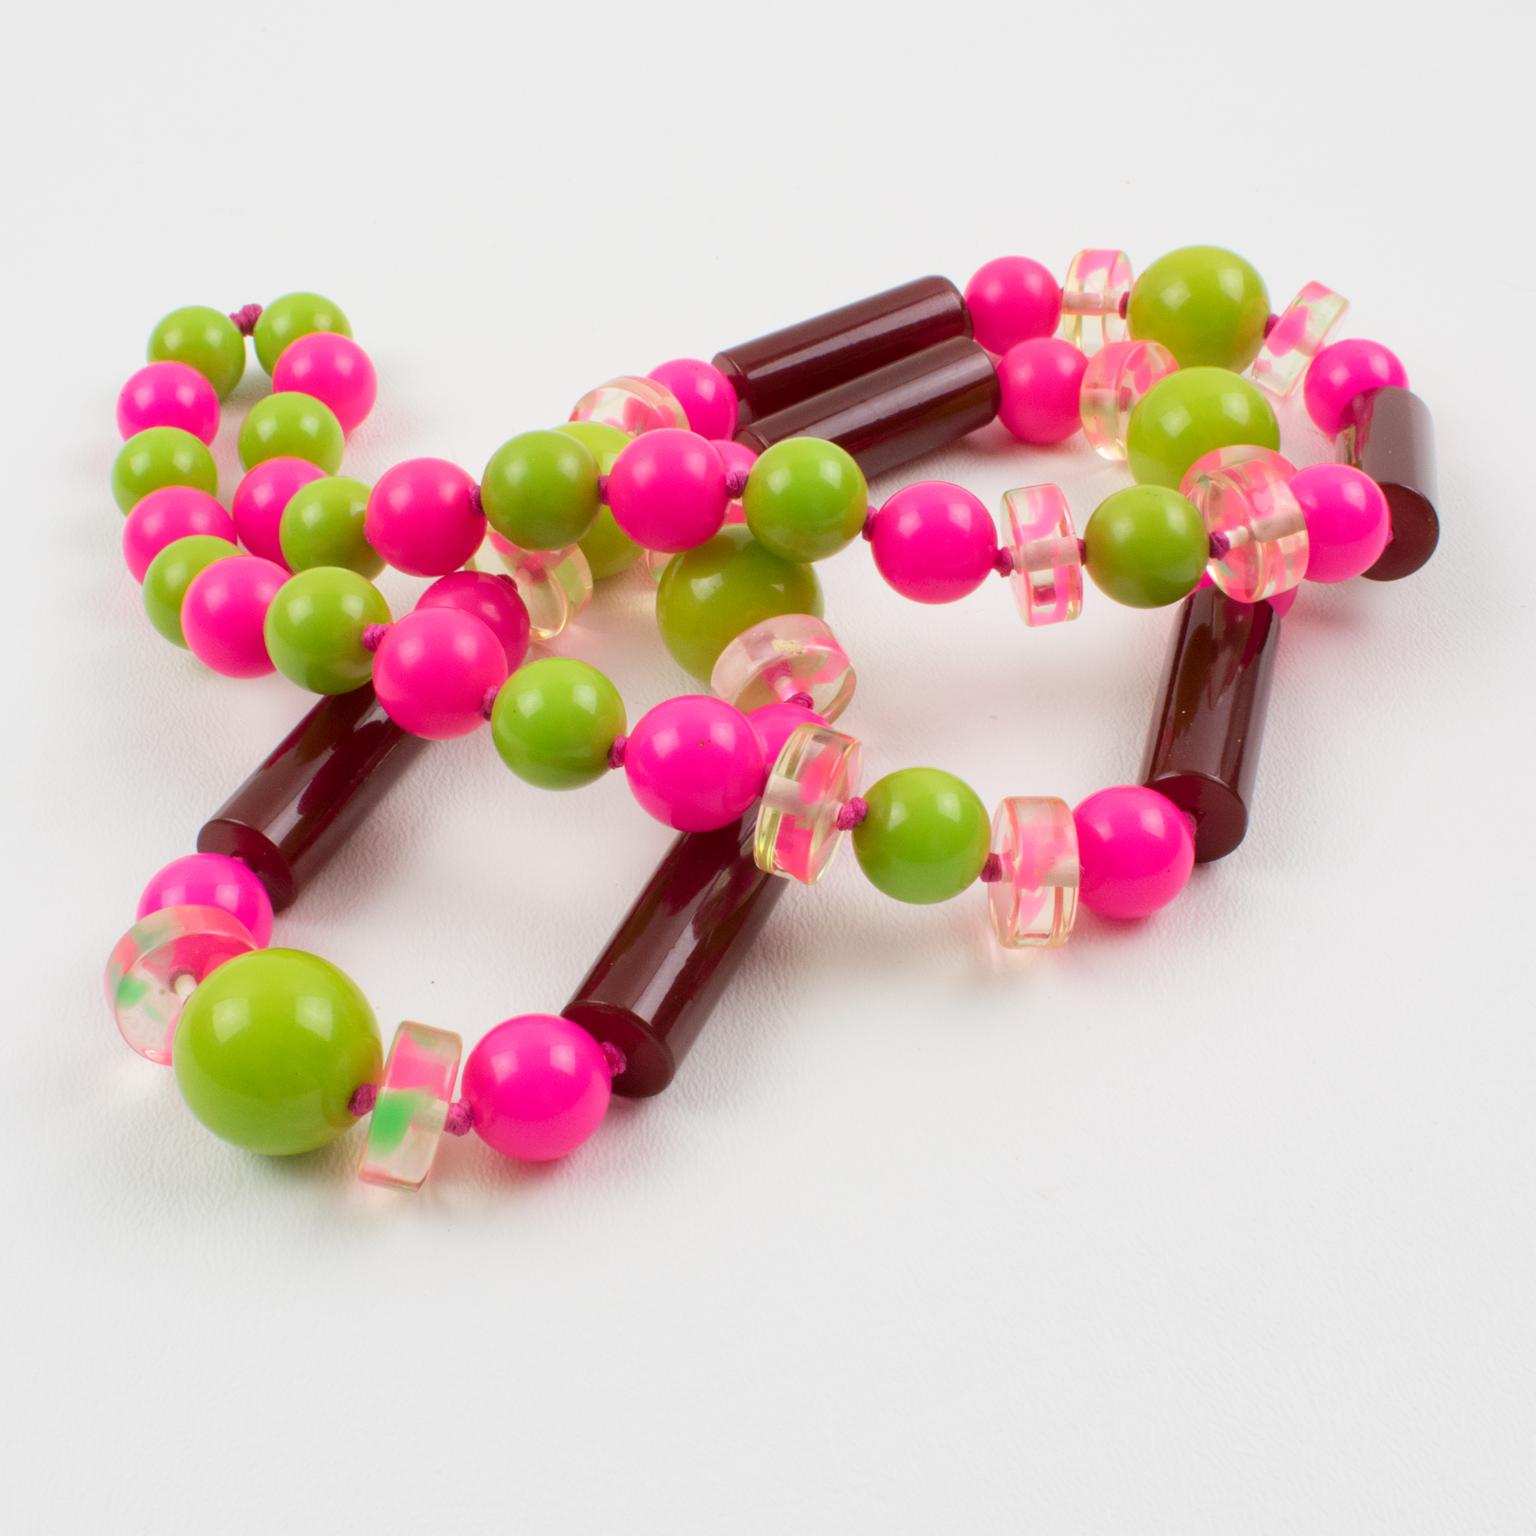 Bakelite and Lucite Extra Long Necklace Burgundy, Hot Pink, Apple Green Beads For Sale 1